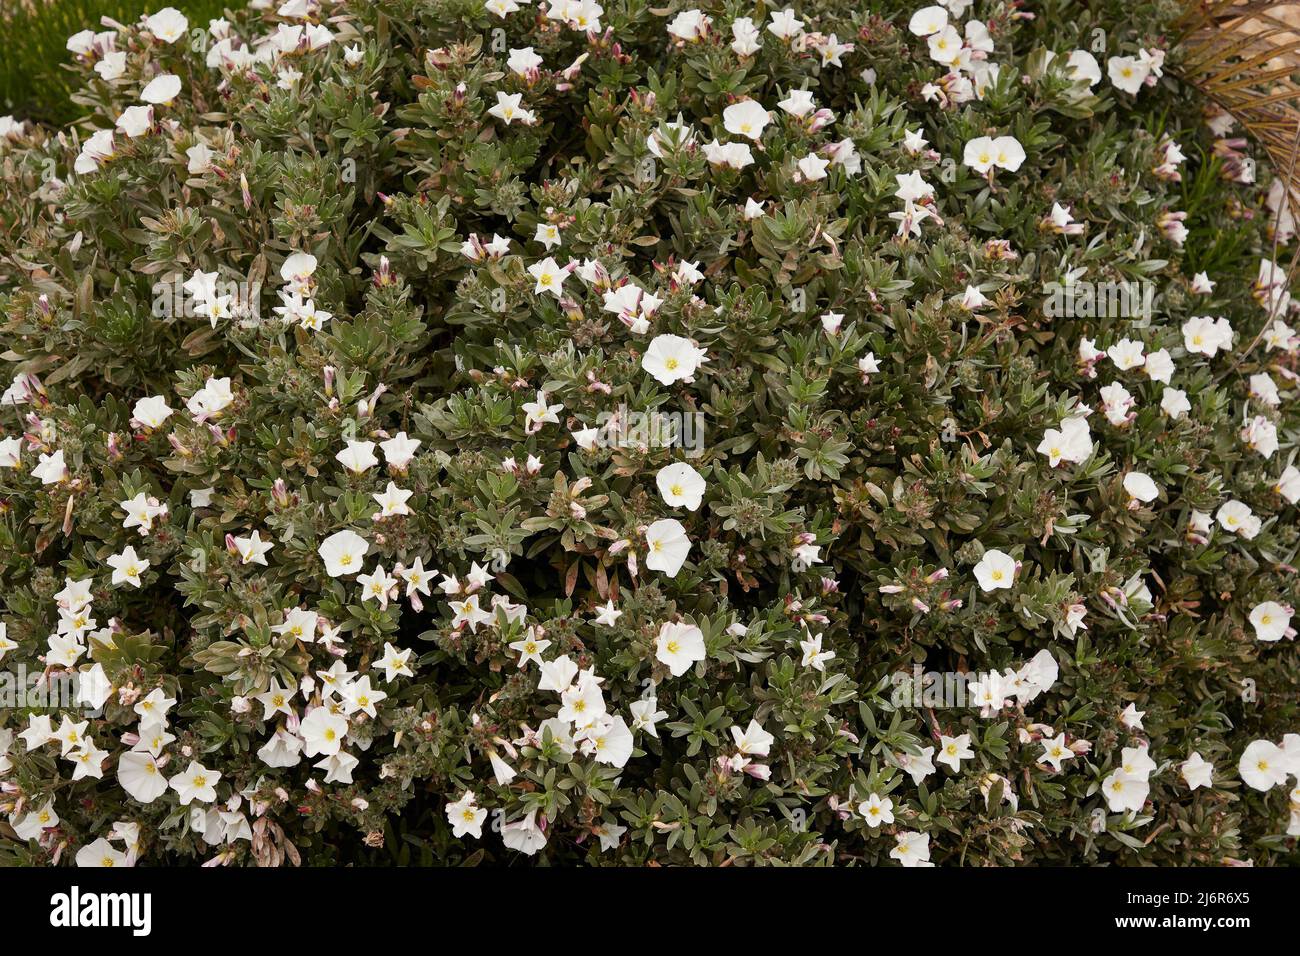 Close up of the white garden flowers of Convolvulus cneorum seen outdoors. Stock Photo